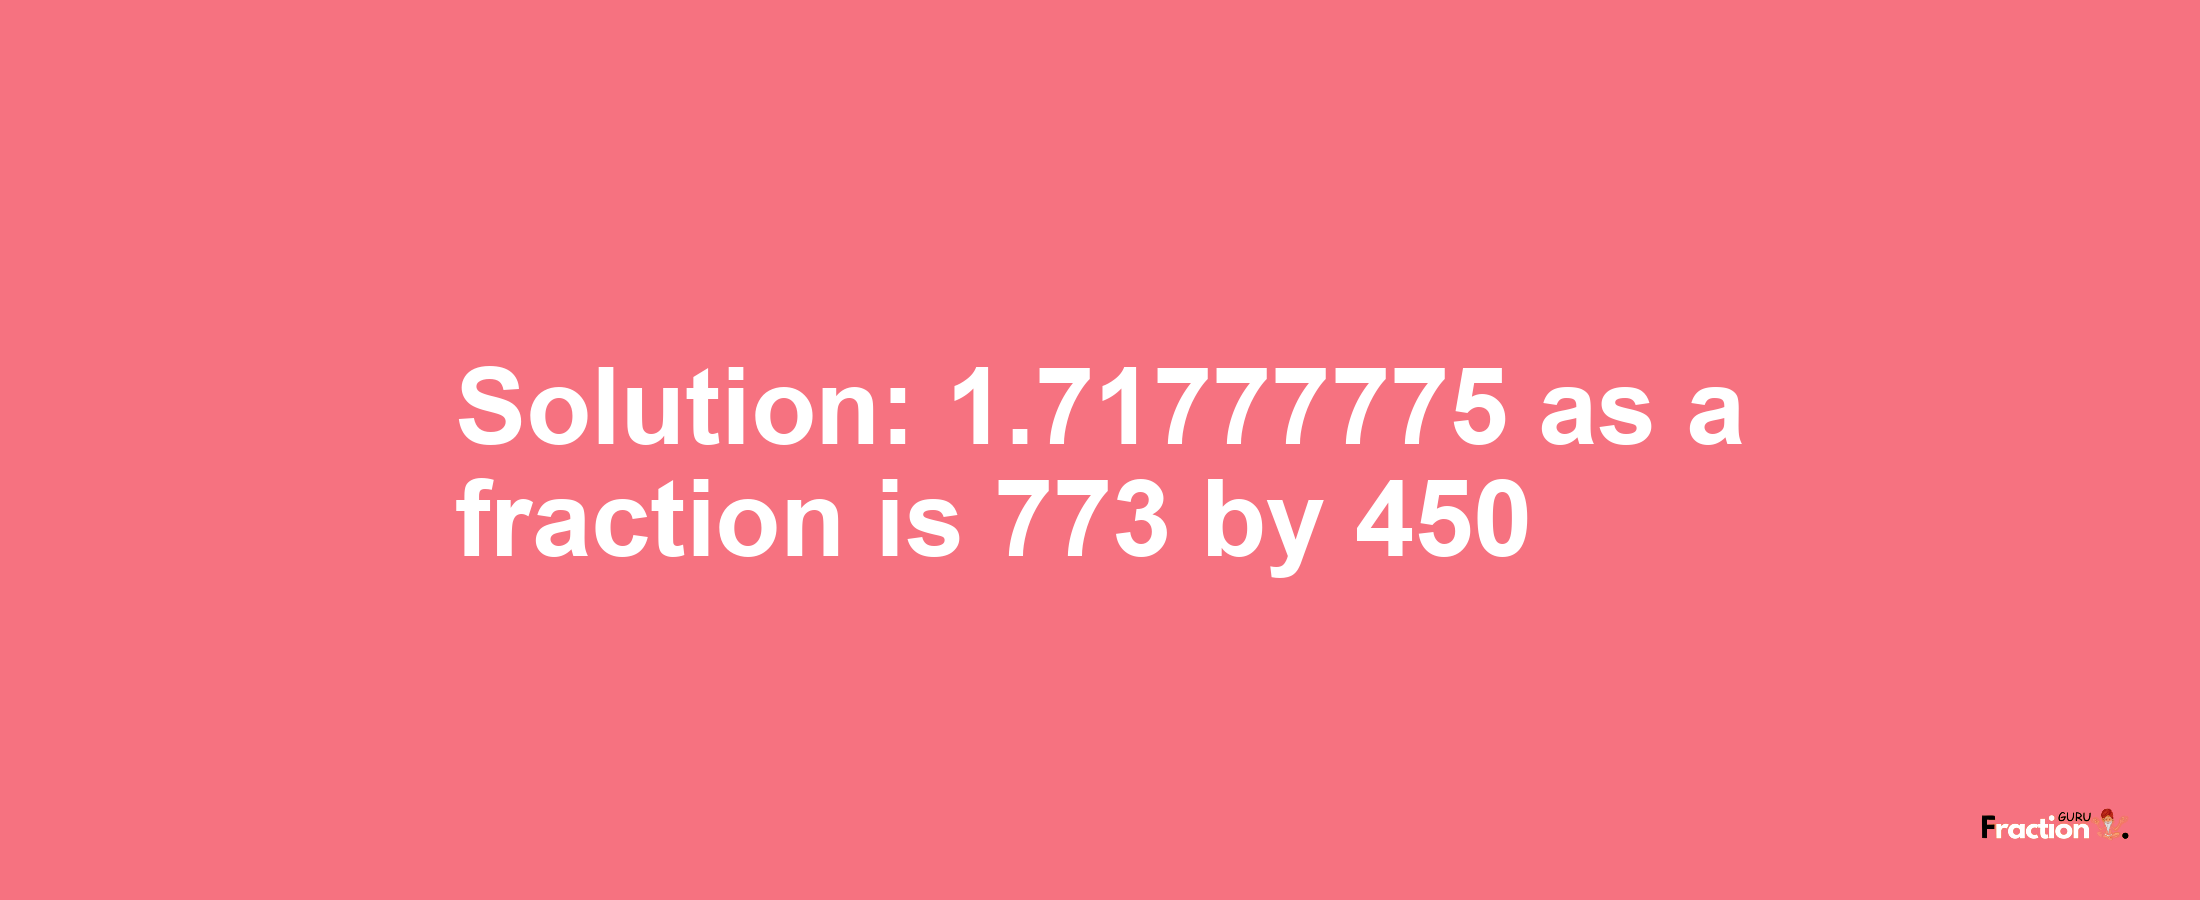 Solution:1.71777775 as a fraction is 773/450